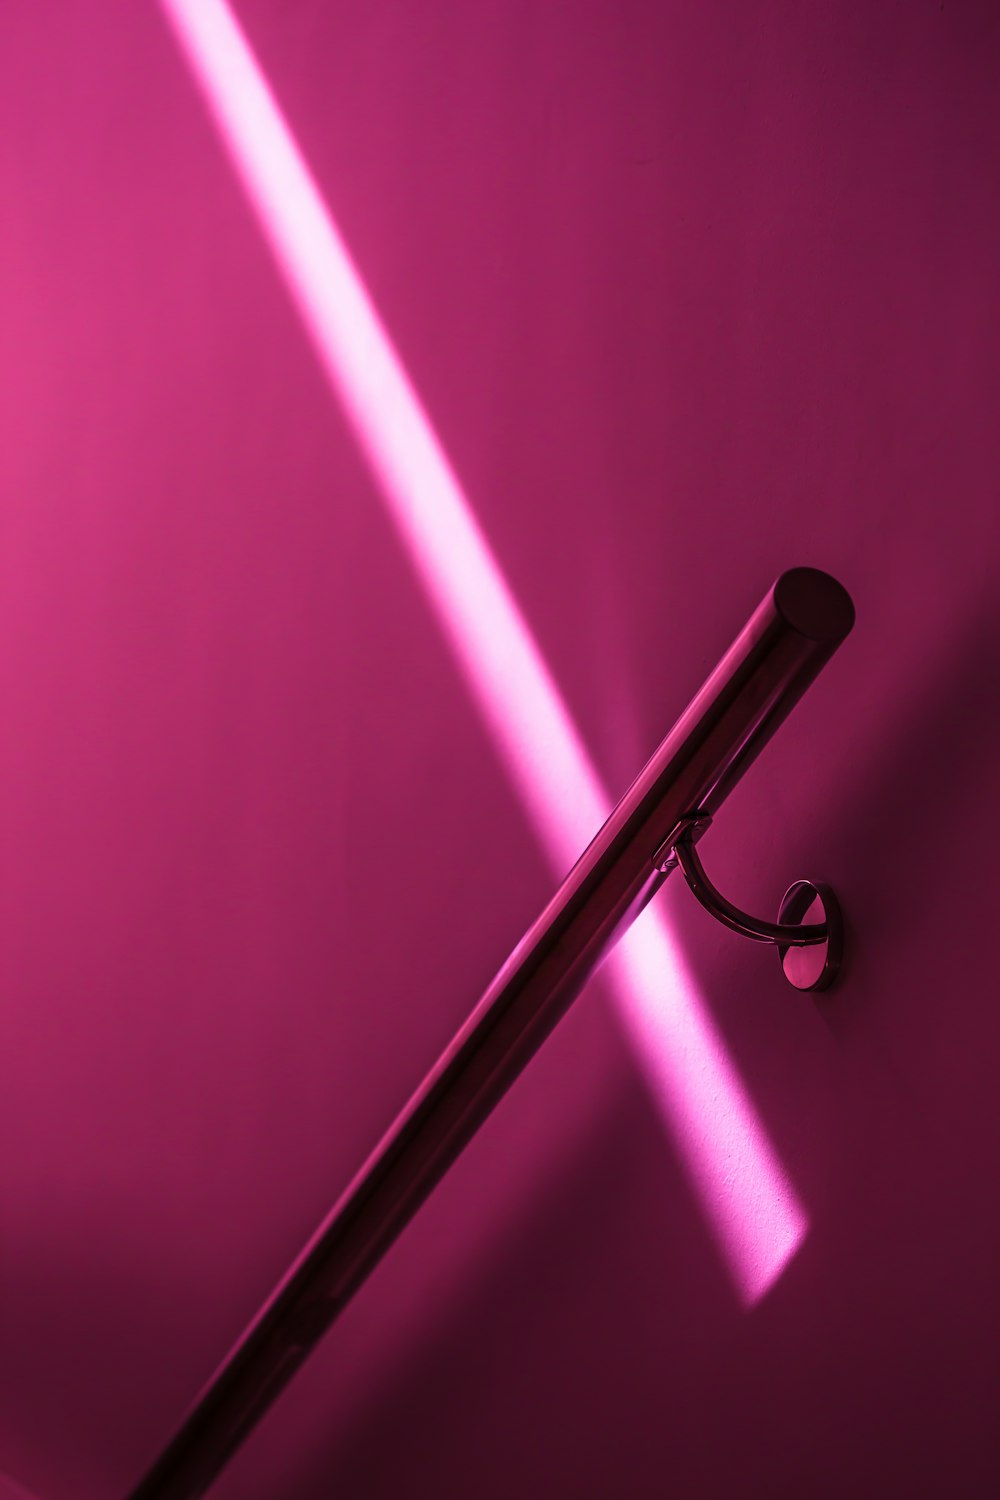 a pink wall with a metal handle on it